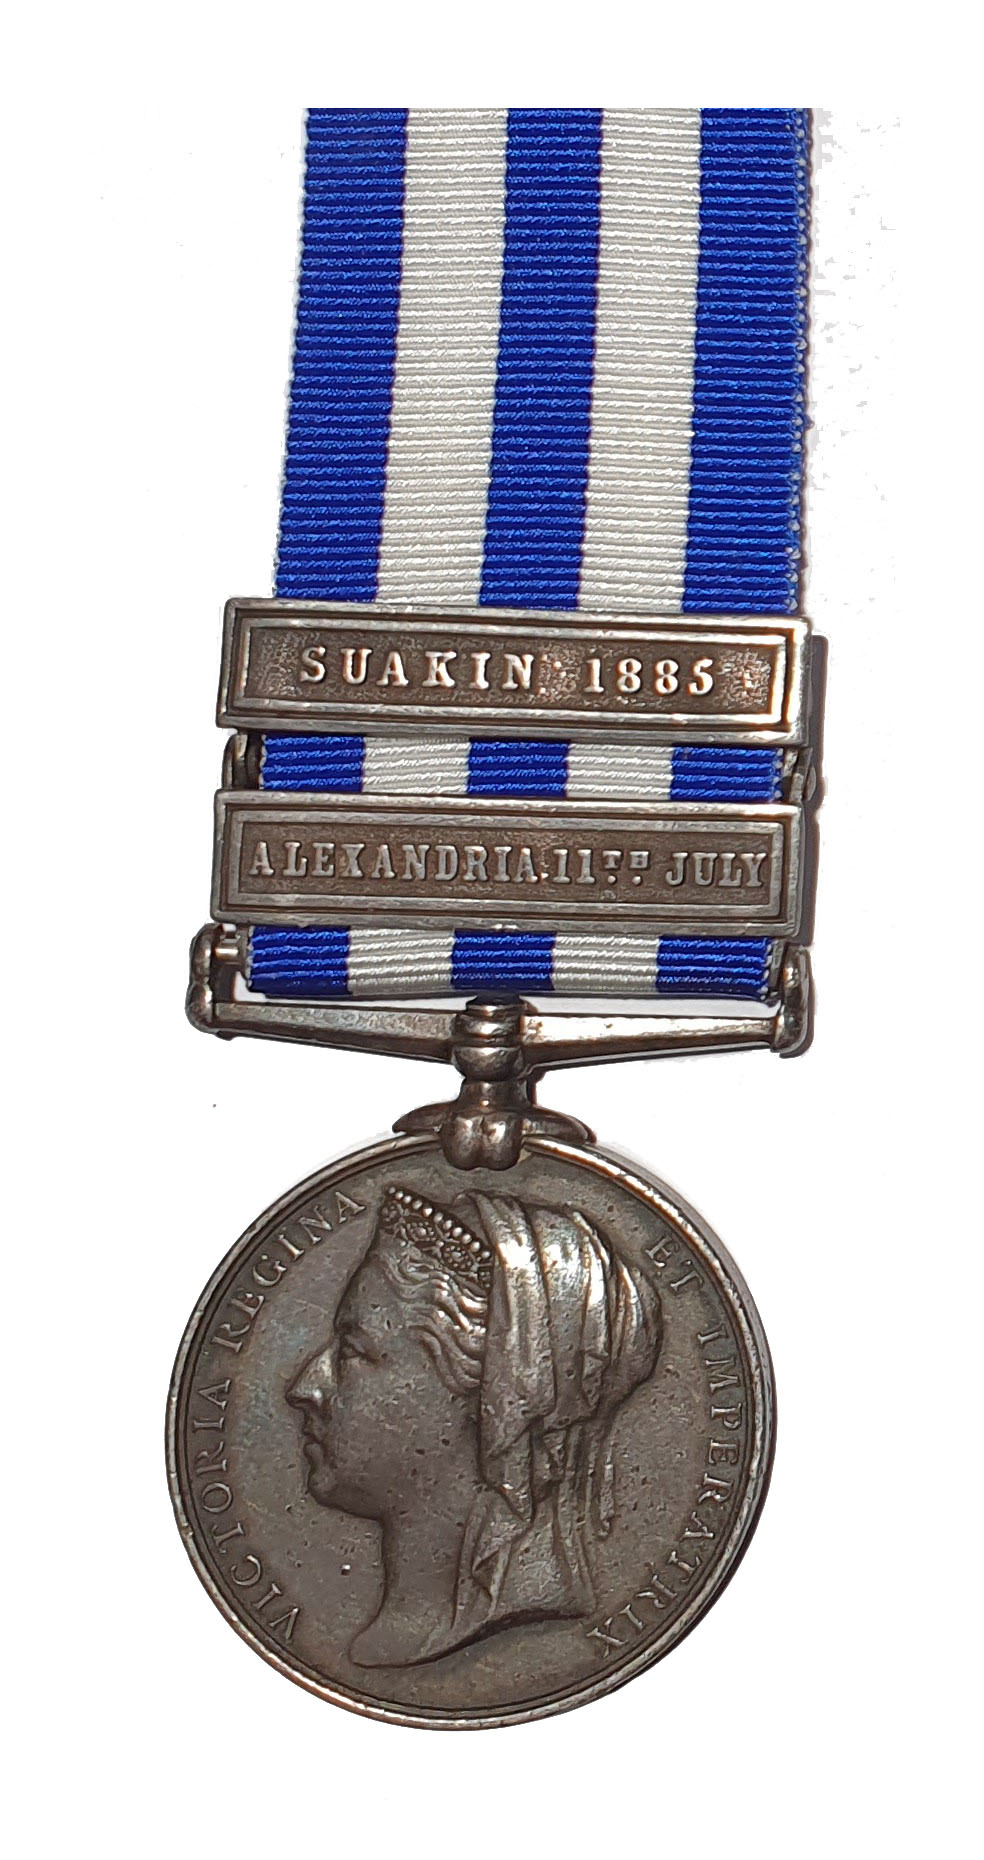 Egypt Medal 1882-89, two clasps, Alexandria 11th July, Suakin 1885